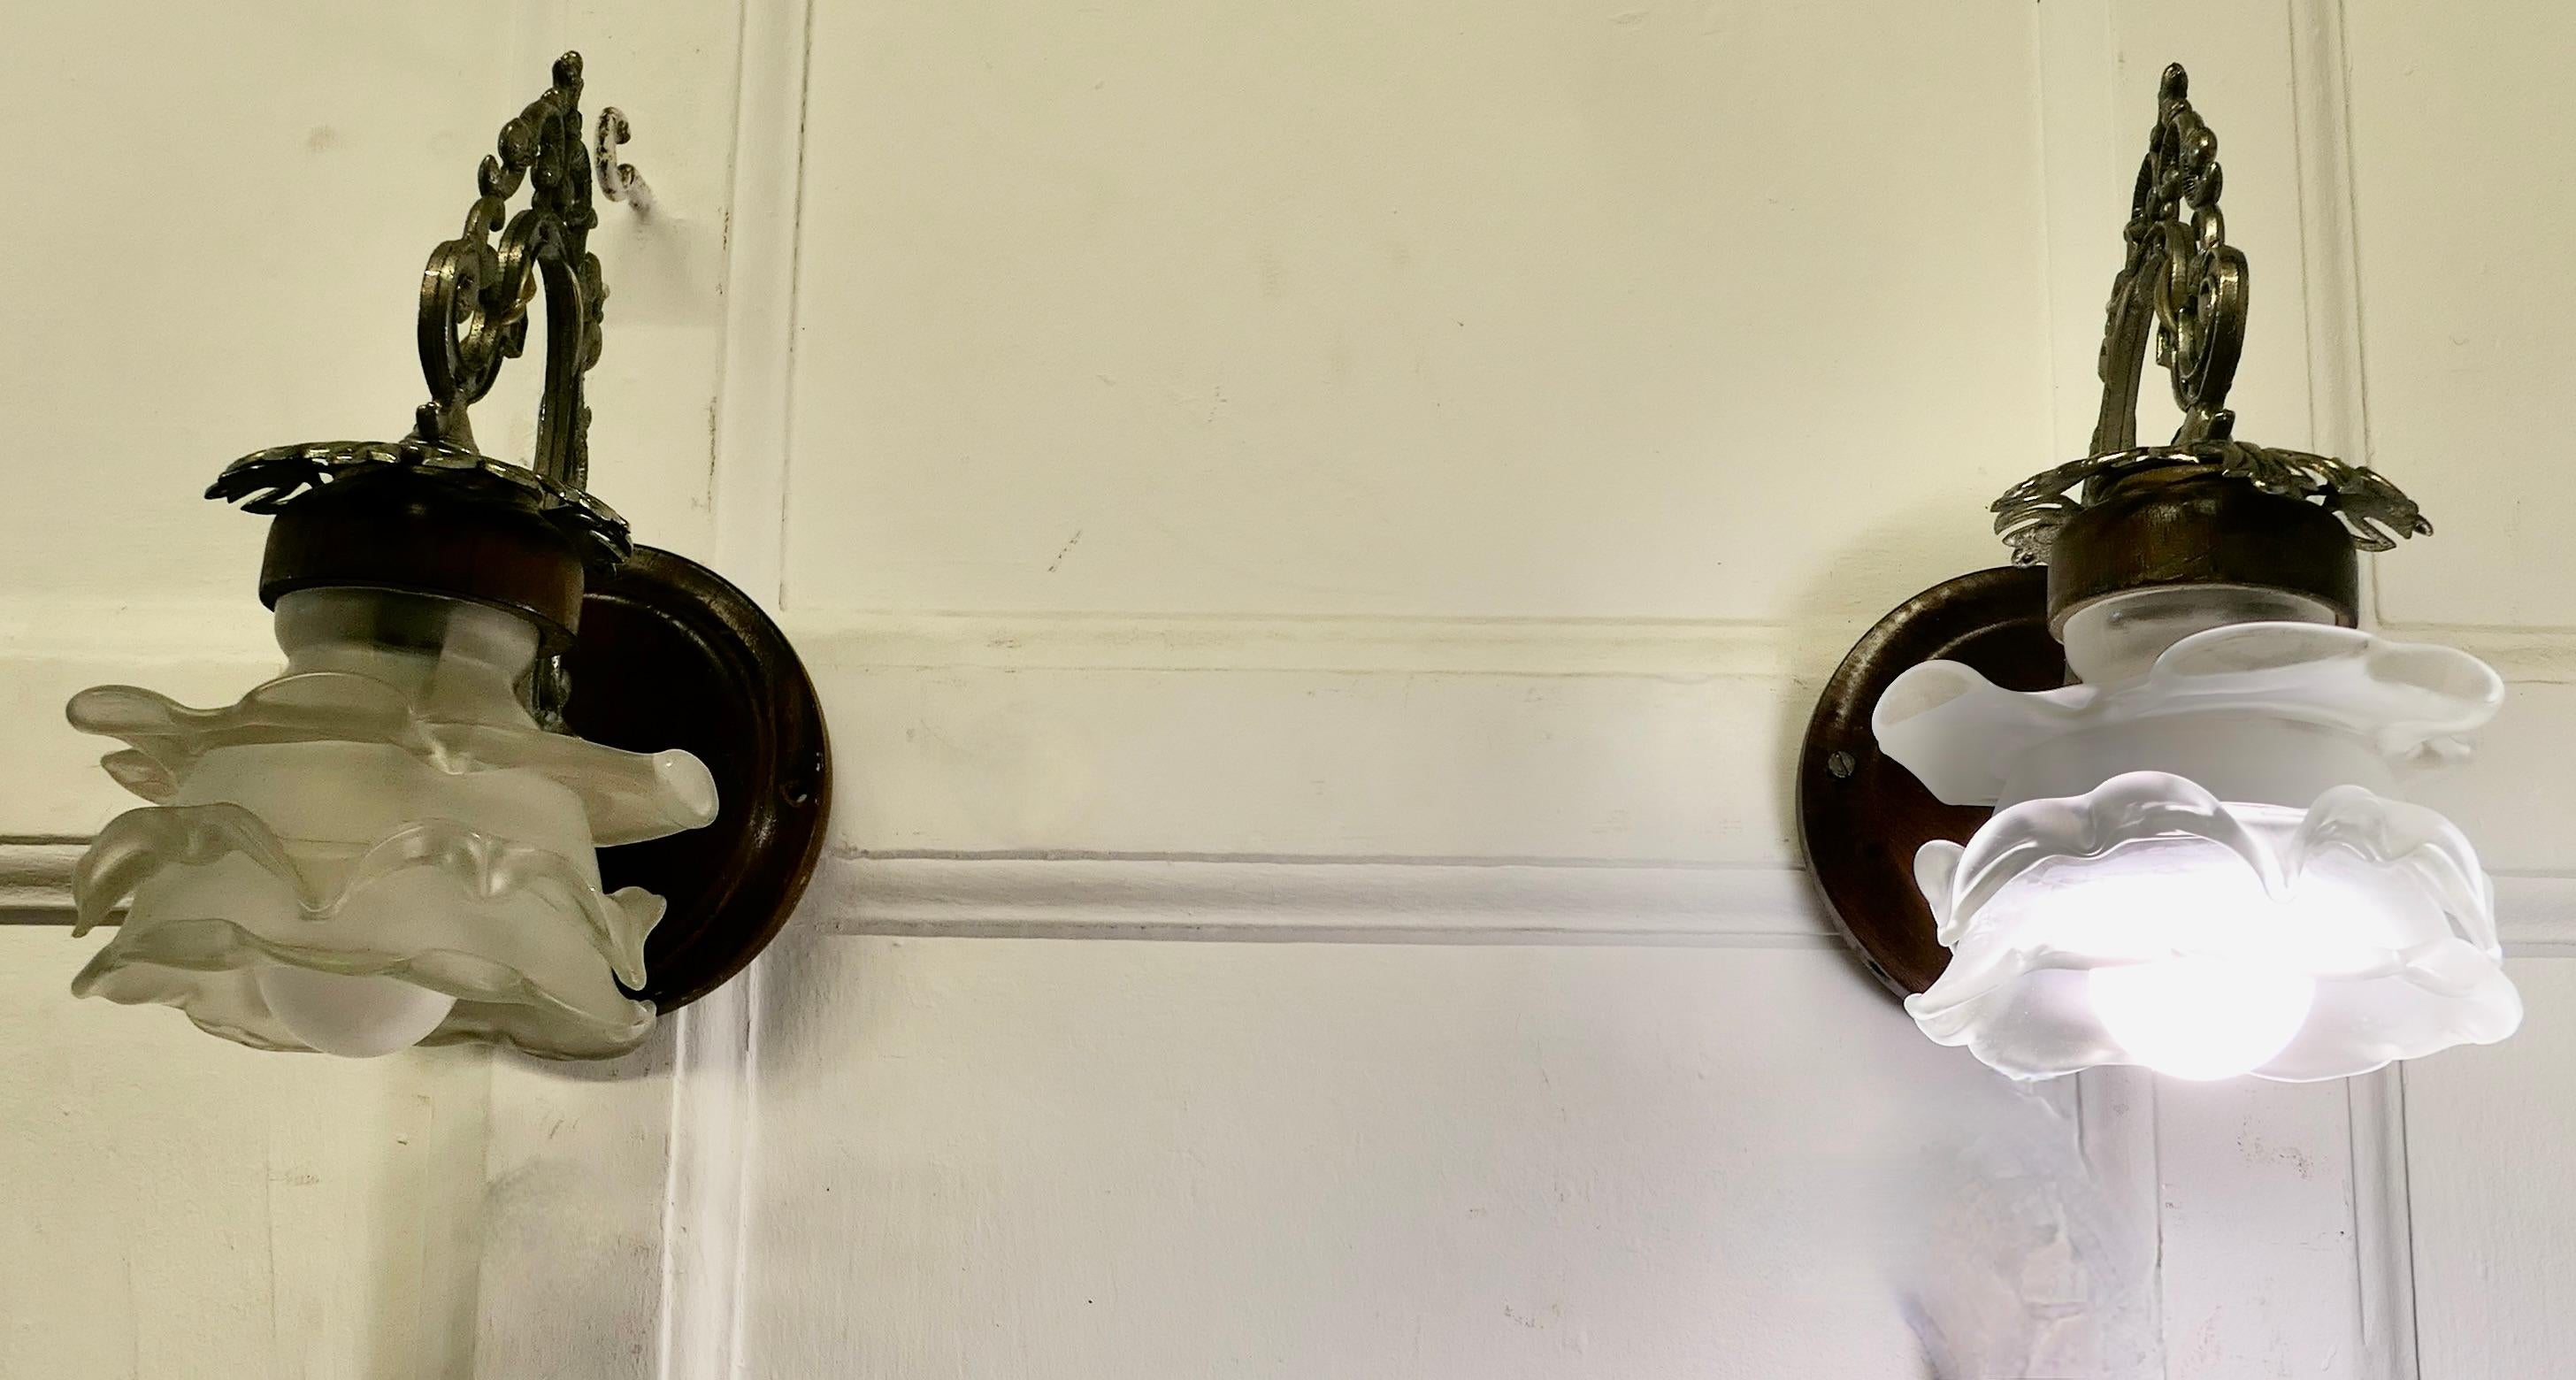 A Pair of French Arts and Crafts Wall Lights with Flower Shades

The Lights have very decorative silvered swan neck arms, and a Flower design opalescent shade
The Lights are mounted on a Pattress plinth for wall fixing, they will need to be